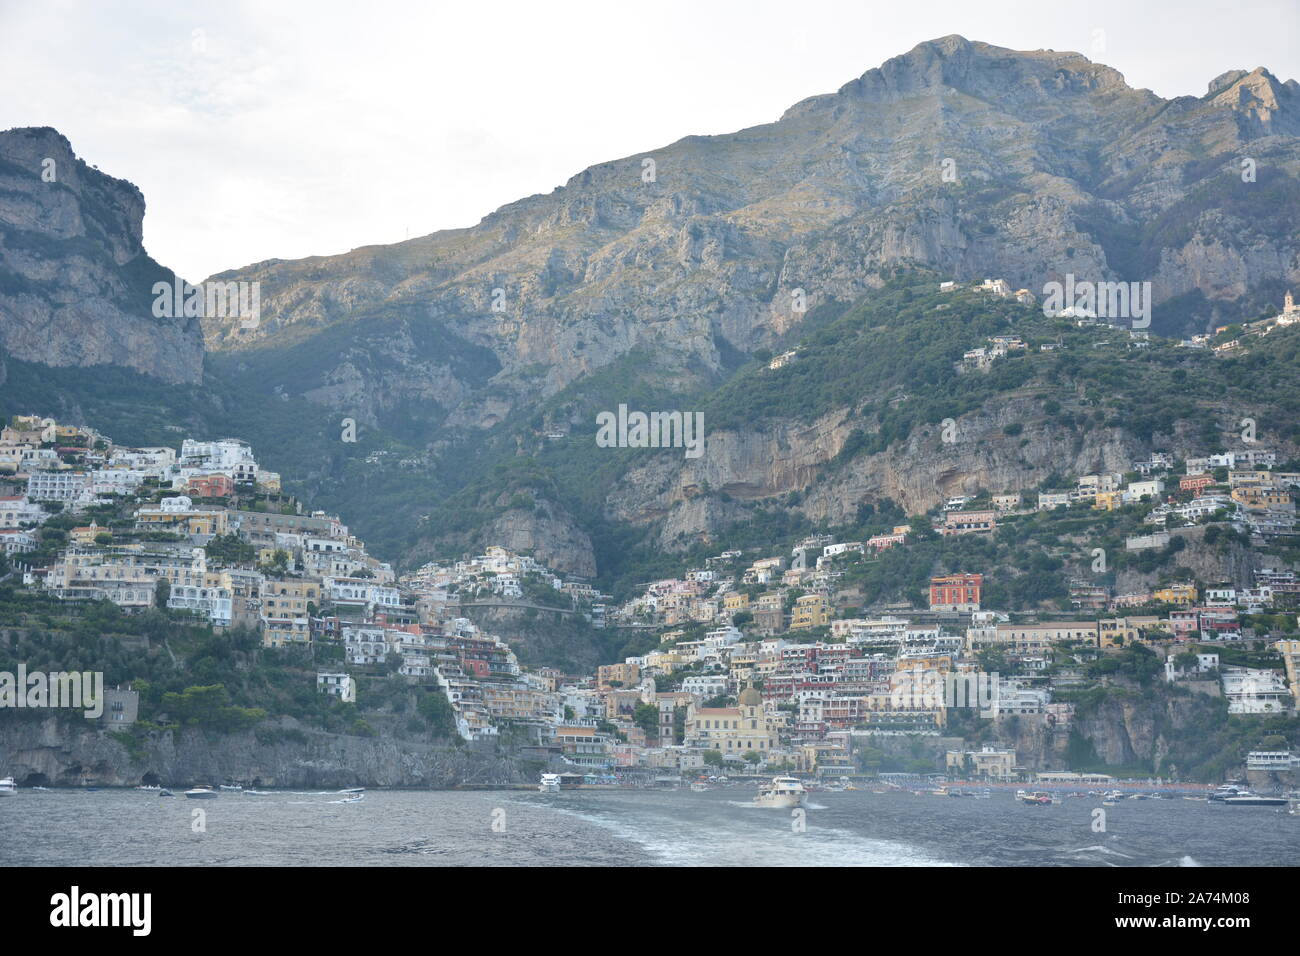 POSITANO, ITALY - AUGUST 23, 2018: The view of Positano Beach and the ...